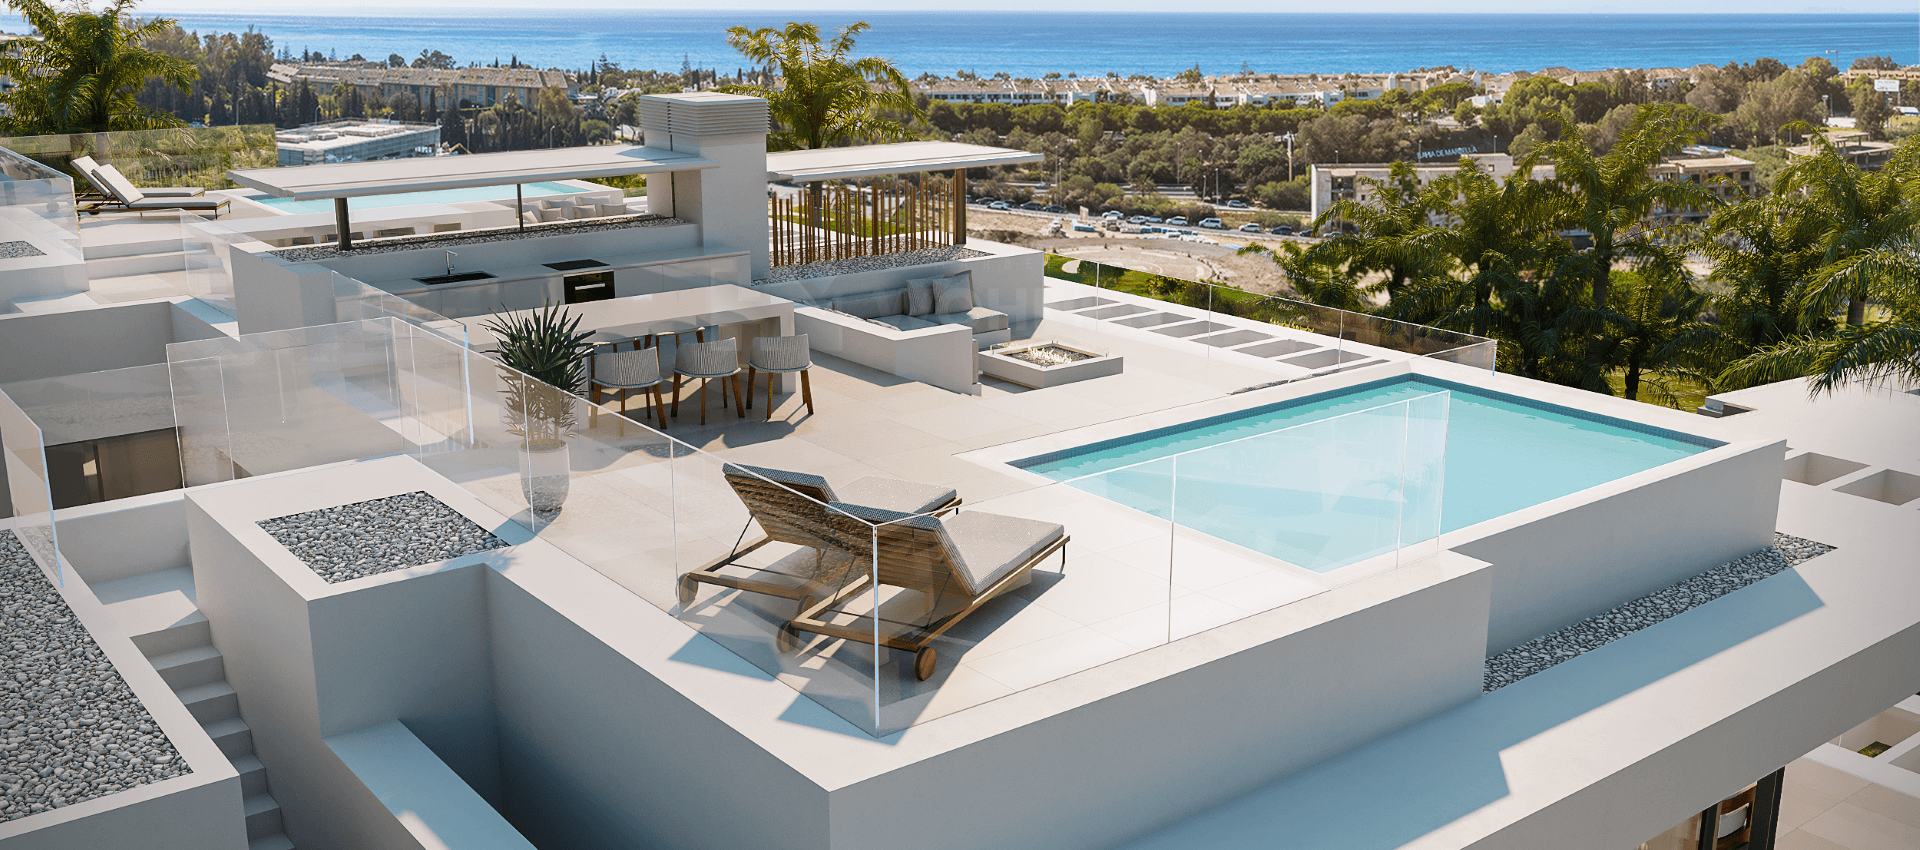 A new project located in Marbella East, on the first line of golf in the Santa Clara